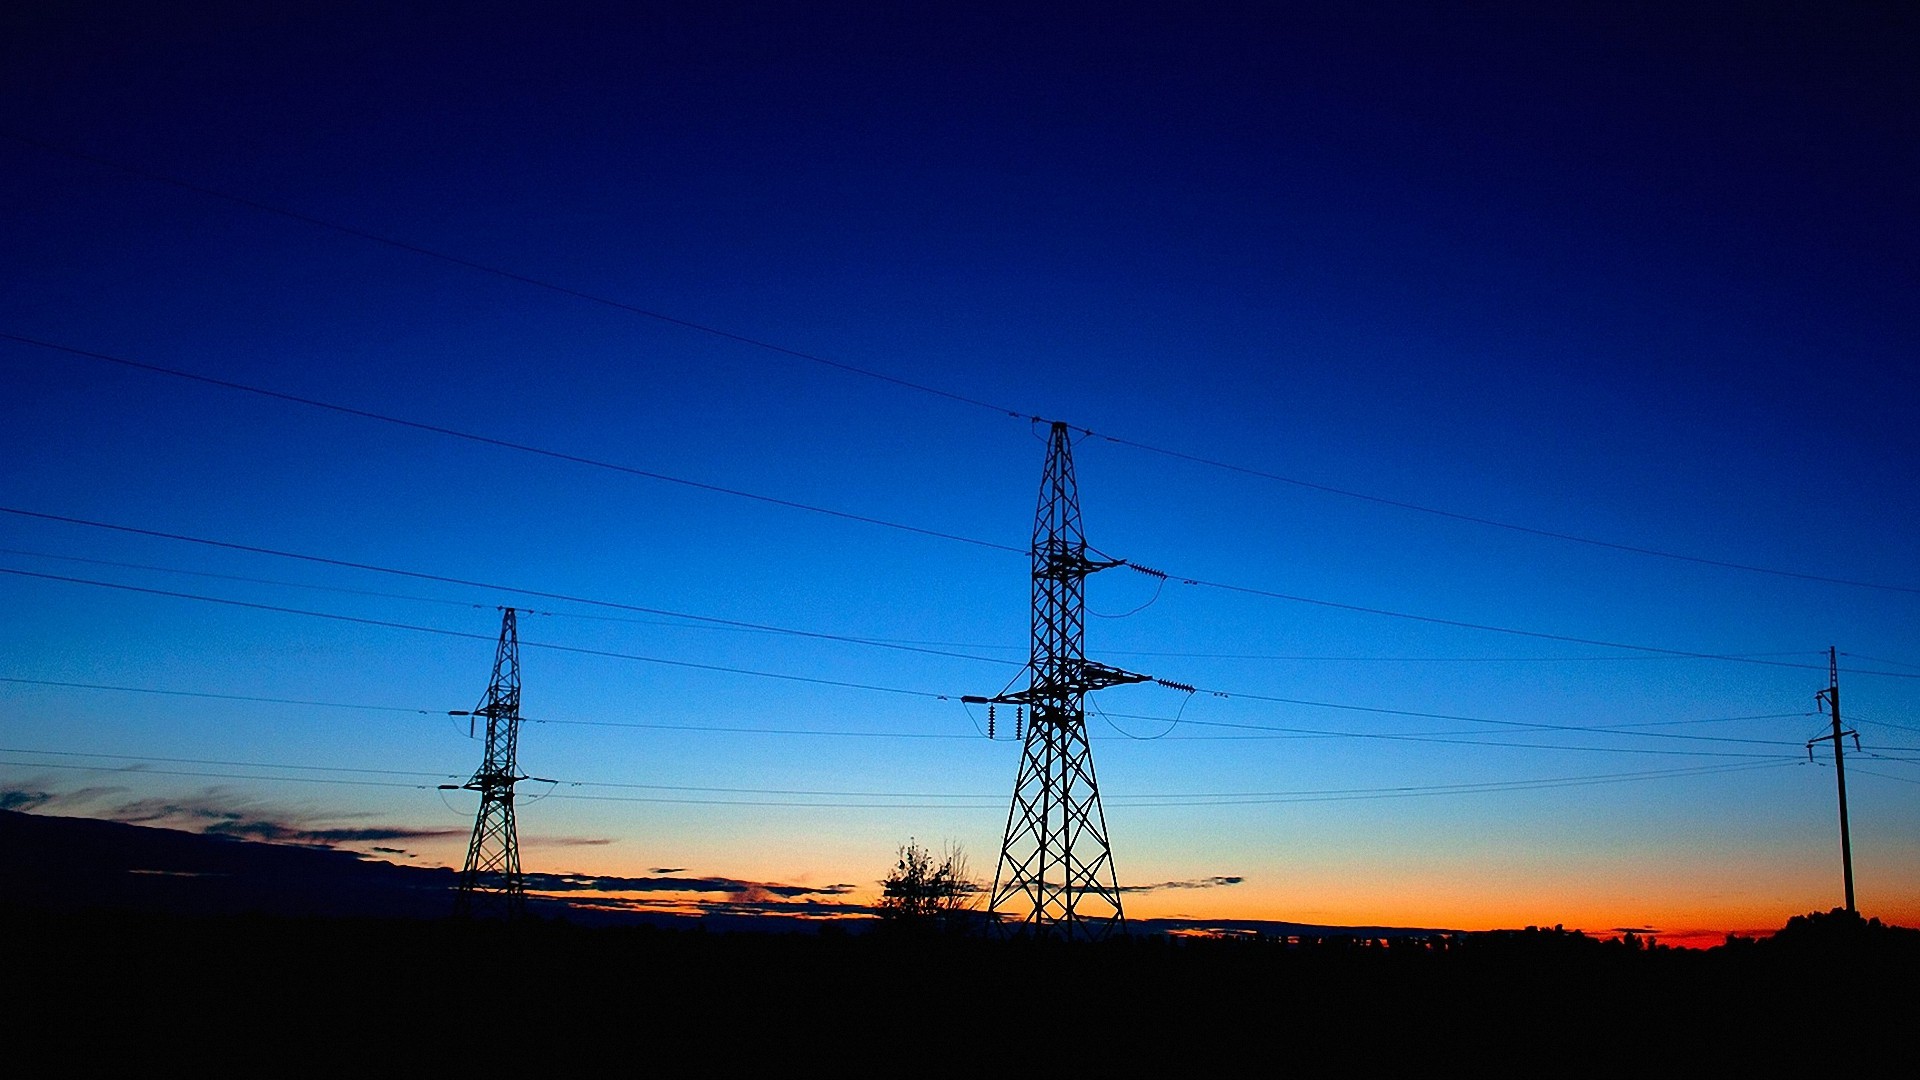 electrical wallpaper hd,sky,overhead power line,electricity,afterglow,transmission tower